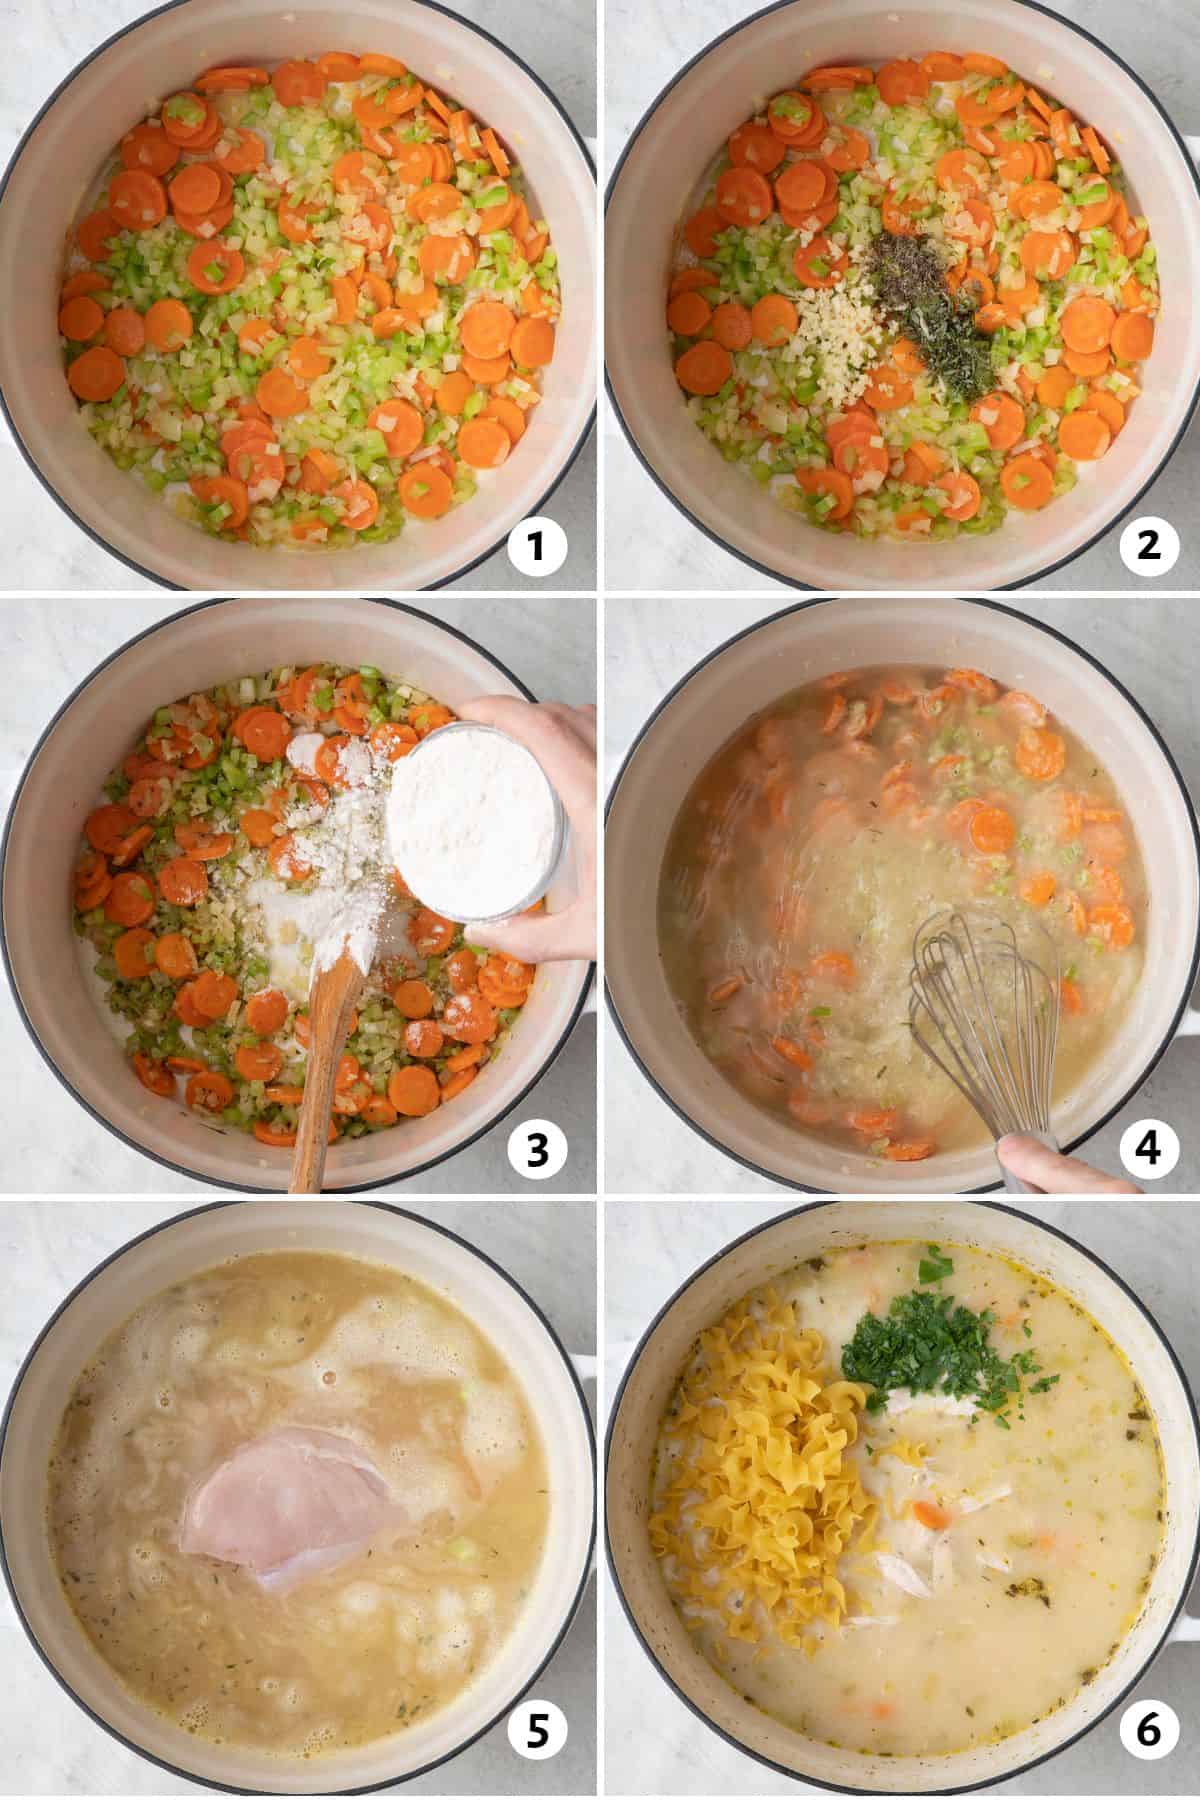 6 image collage making soup in one pot: 1- cooked onions, celery and carrots in dutch oven, 2- herbs and garlic added, 3- flour sprinkled over veggies with a wooden spoon stirring, 4-liquid being whisked, chicken breast added, chicken shredded and added back with egg noodles and parsley.